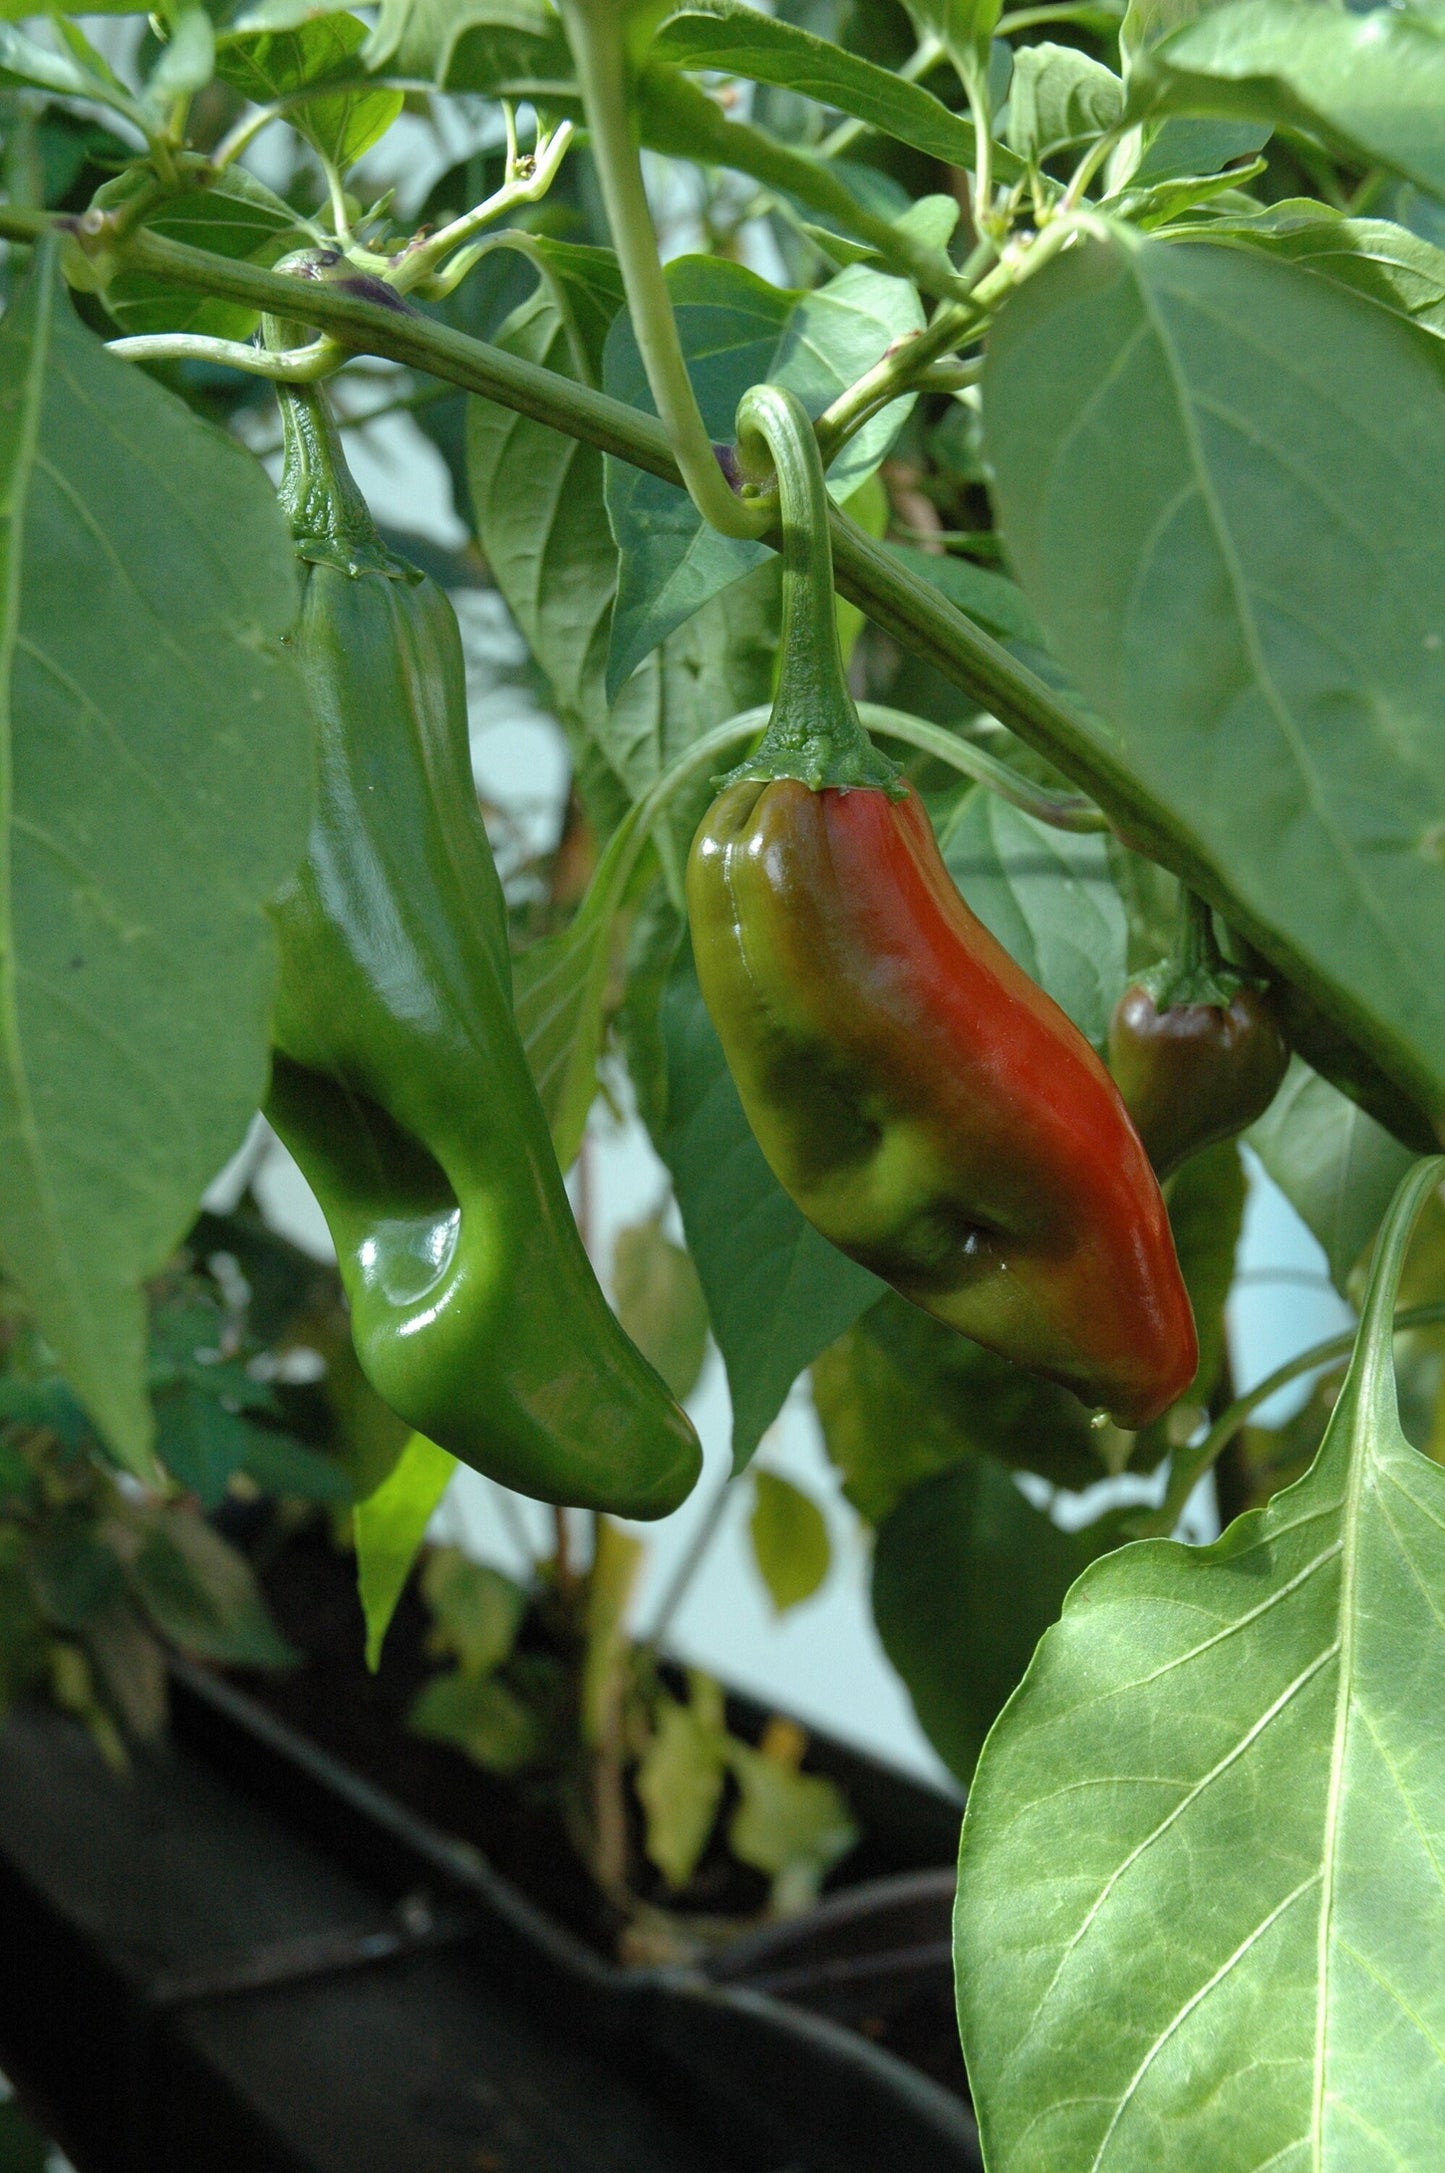 Numex Big Jim Pepper * Largest Chile Pepper * Hot * 12 Inches * 10 Seeds *